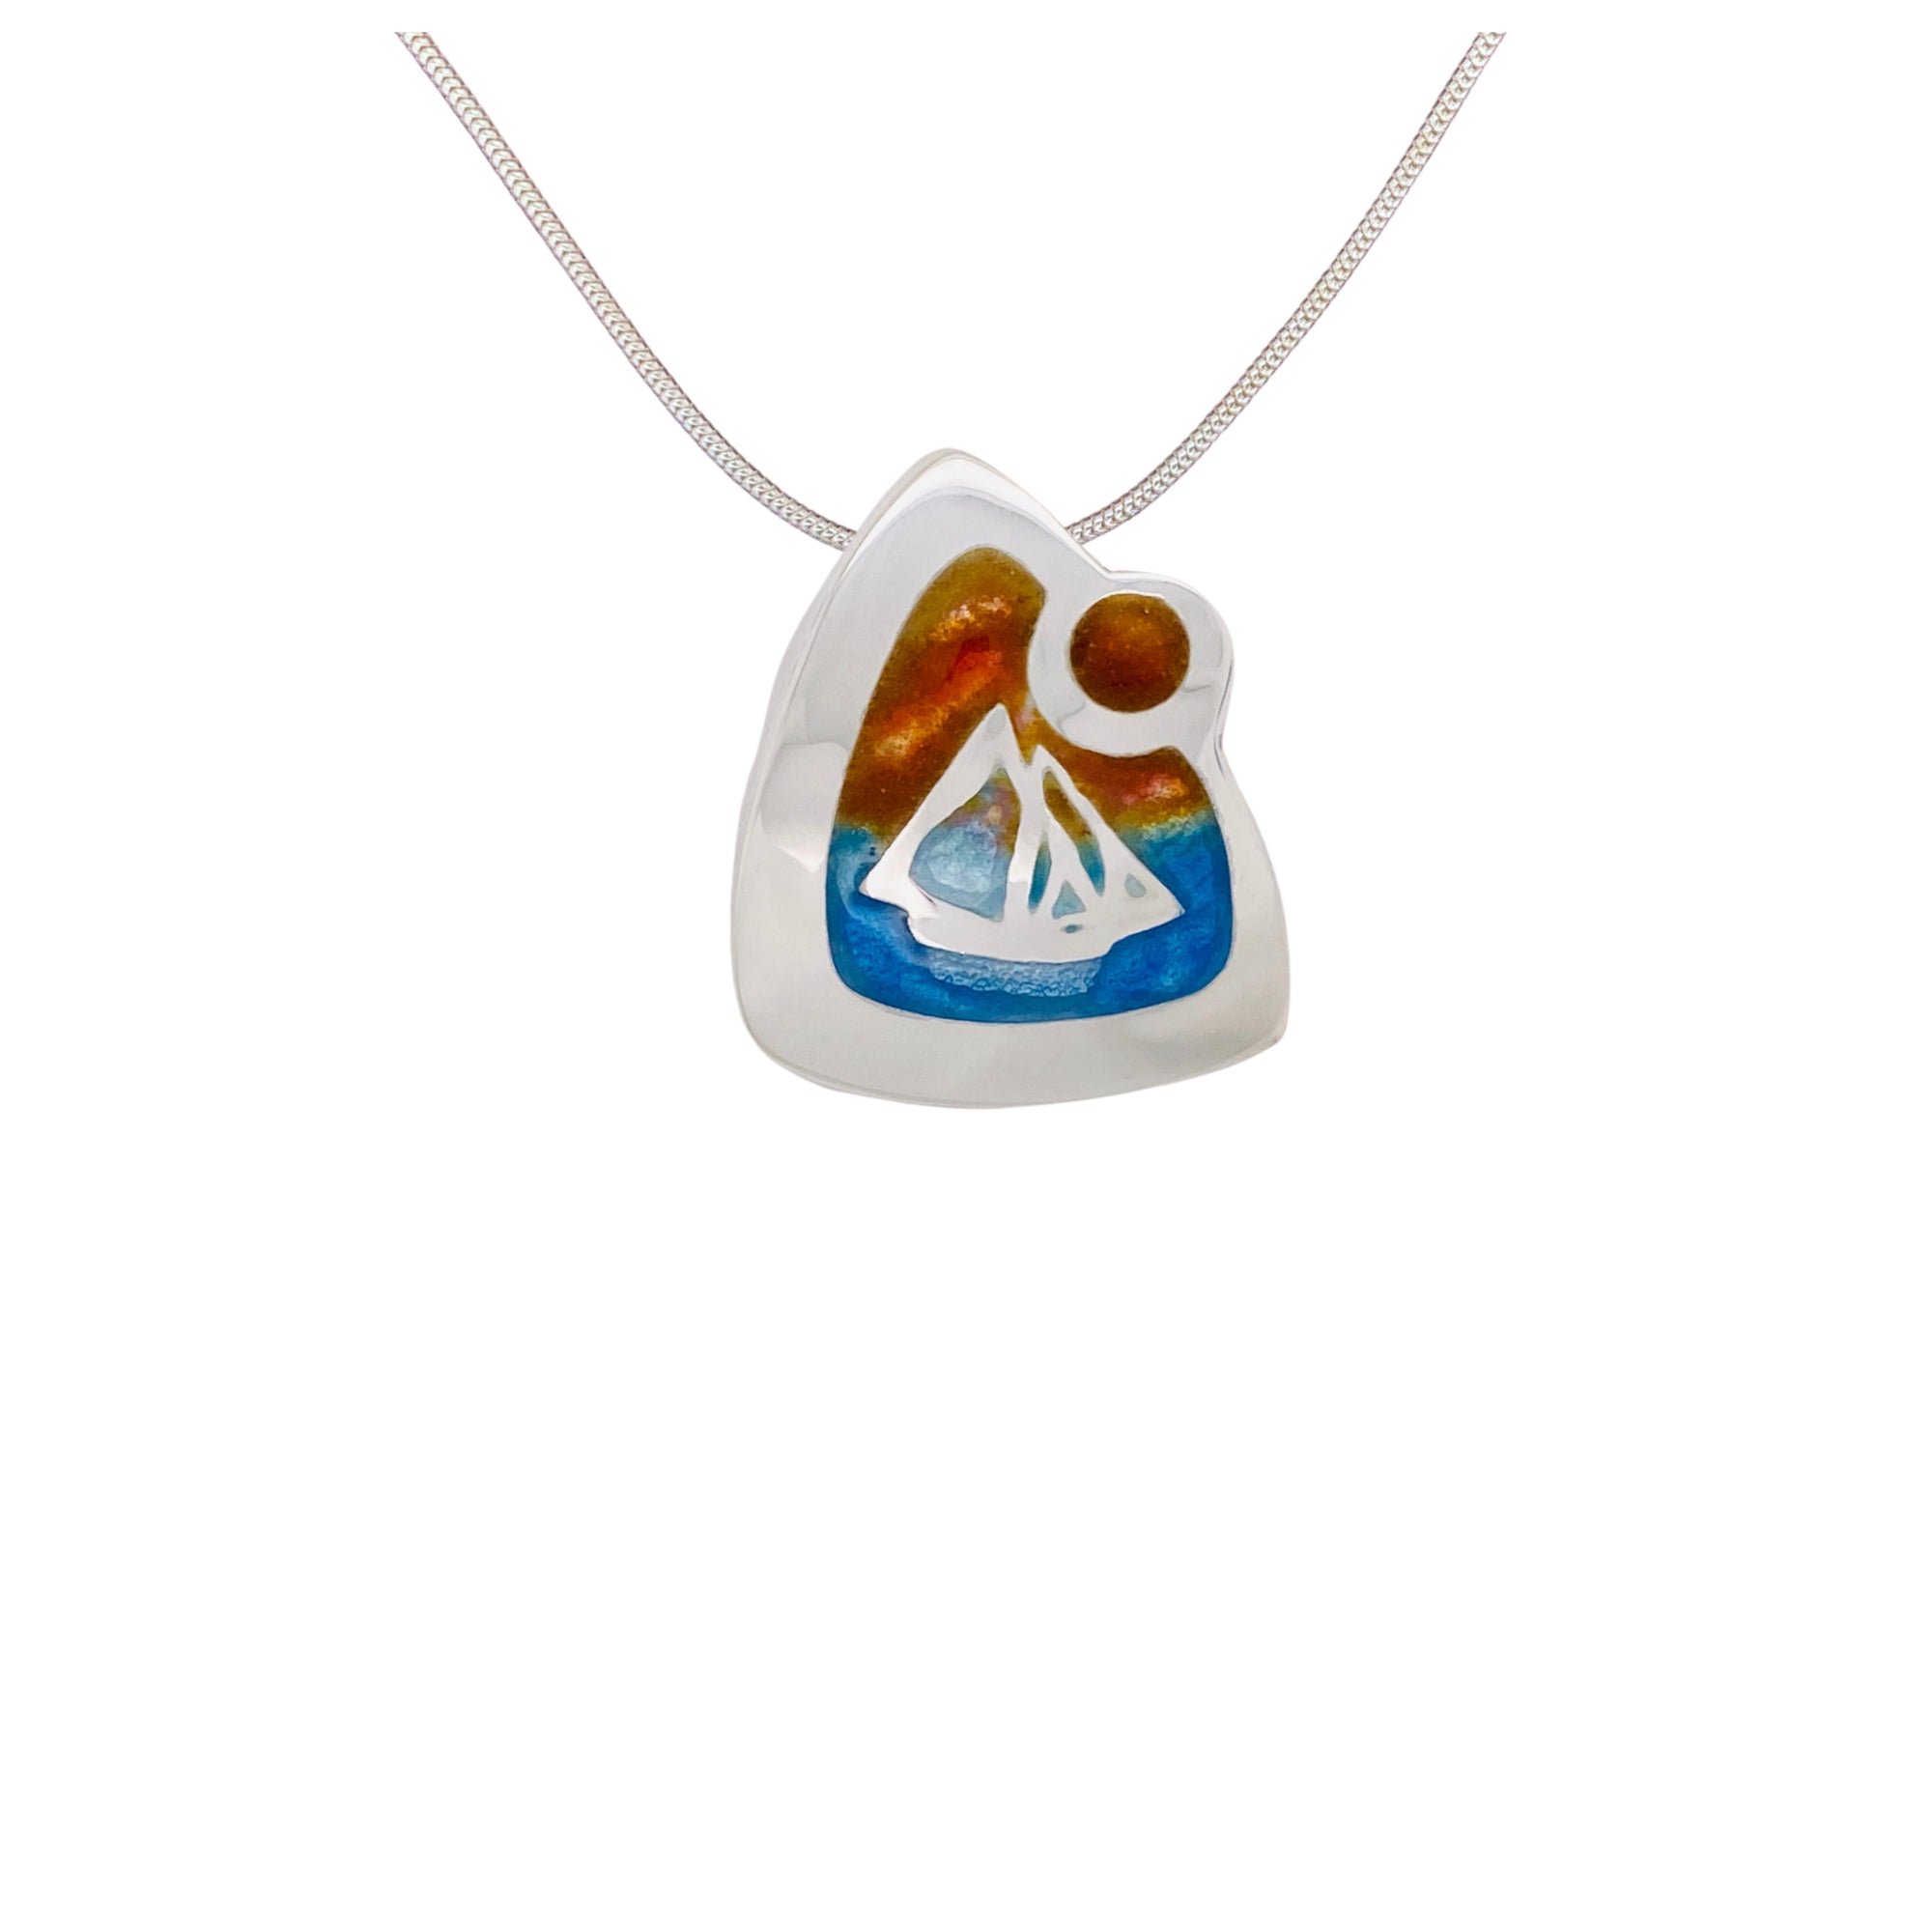 Camille Patton Sailing at Sunset Champleve Jewelry Necklace S01